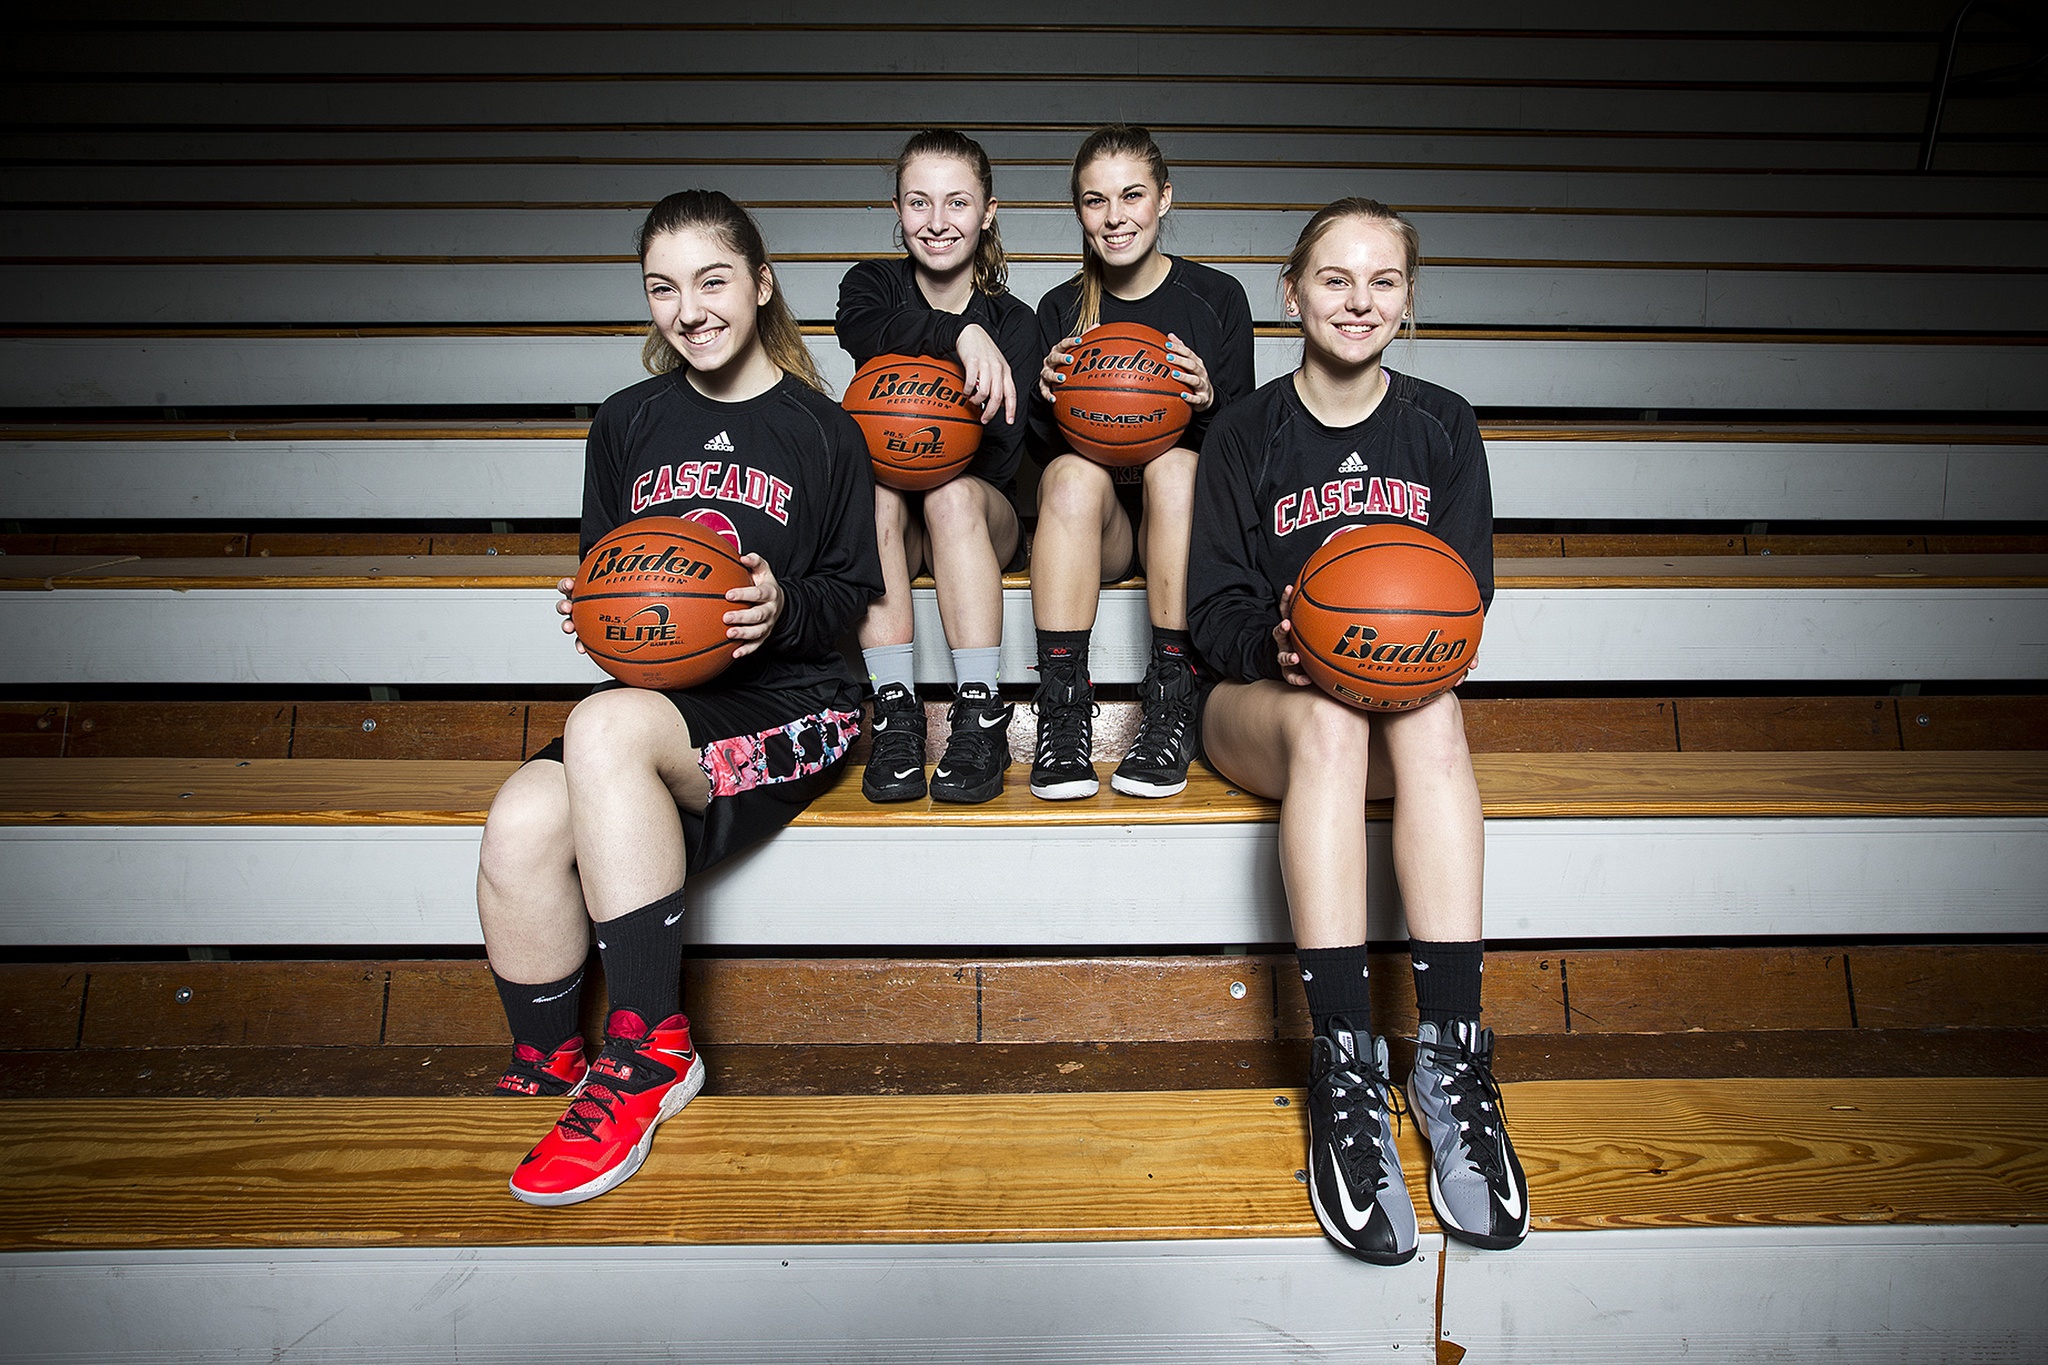 Cascade seniors (from left) Megan Thomas, Anneka Hilde, Jessica Welch and Lexi Strike helped snap their team’s 41-game Wesco 4A losing streak. (Ian Terry / The Herald)